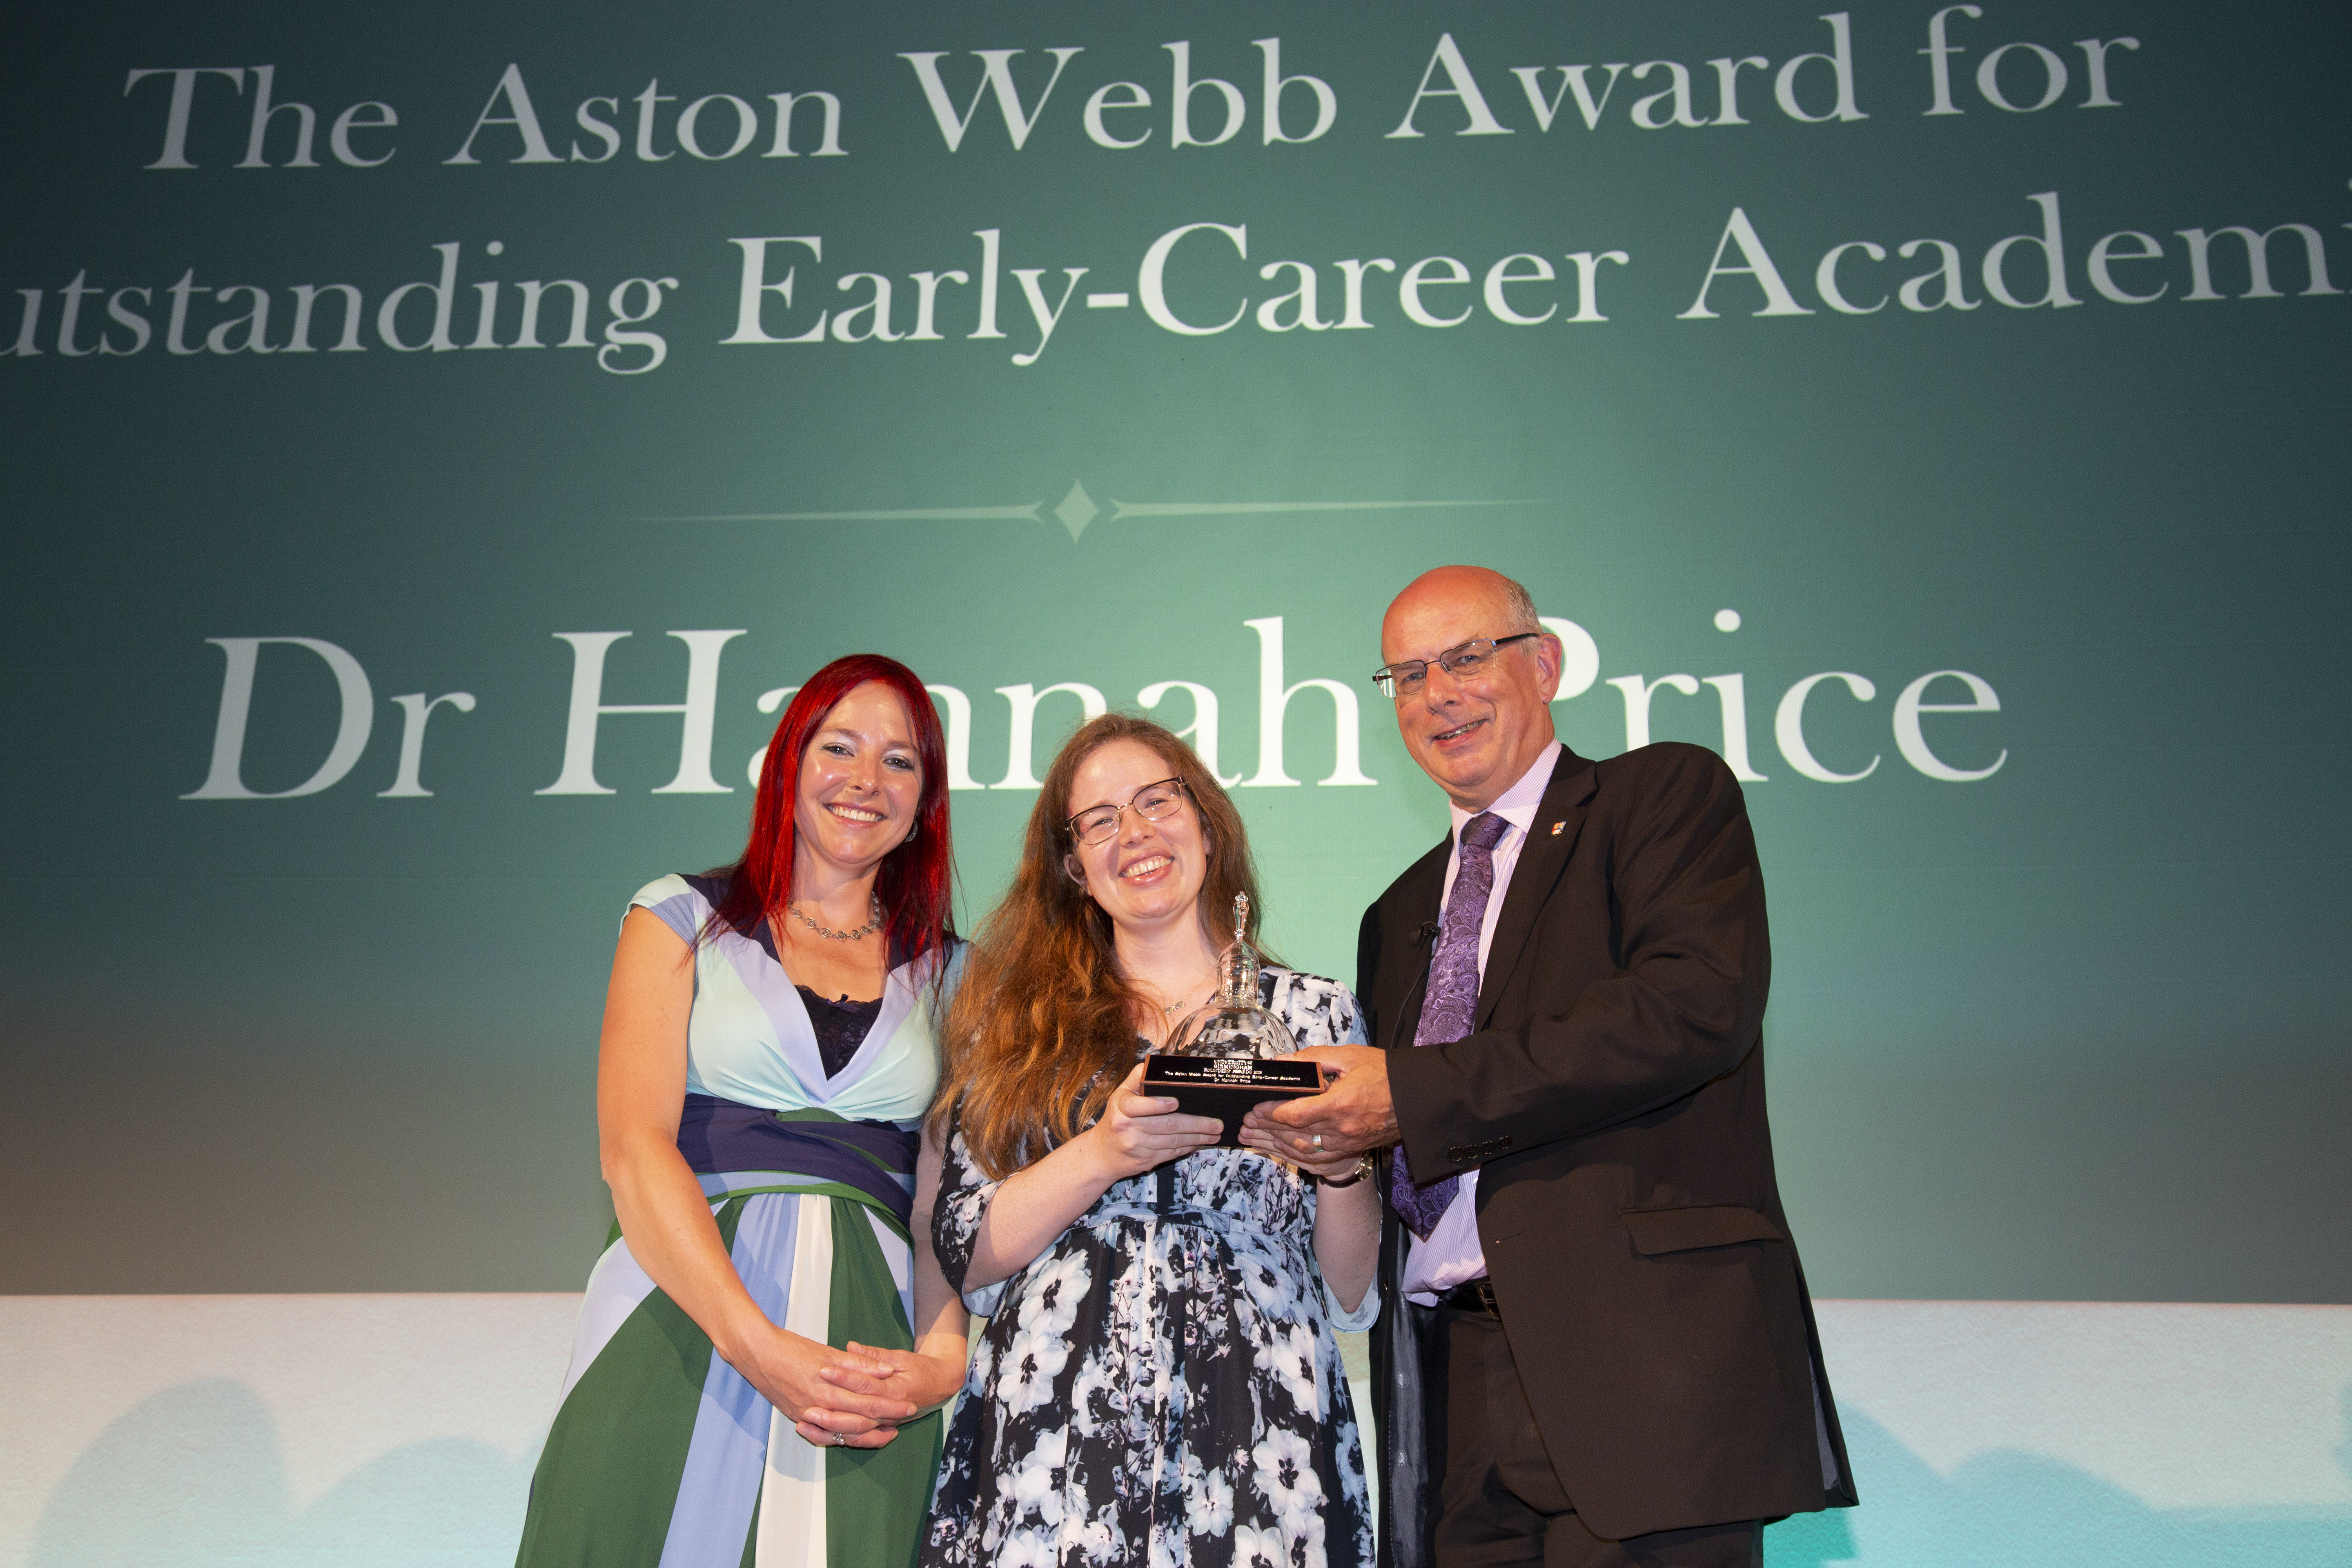 Dr Hannah Price (centre) receiving the Aston Webb Award for Outstanding Early-Career Academic